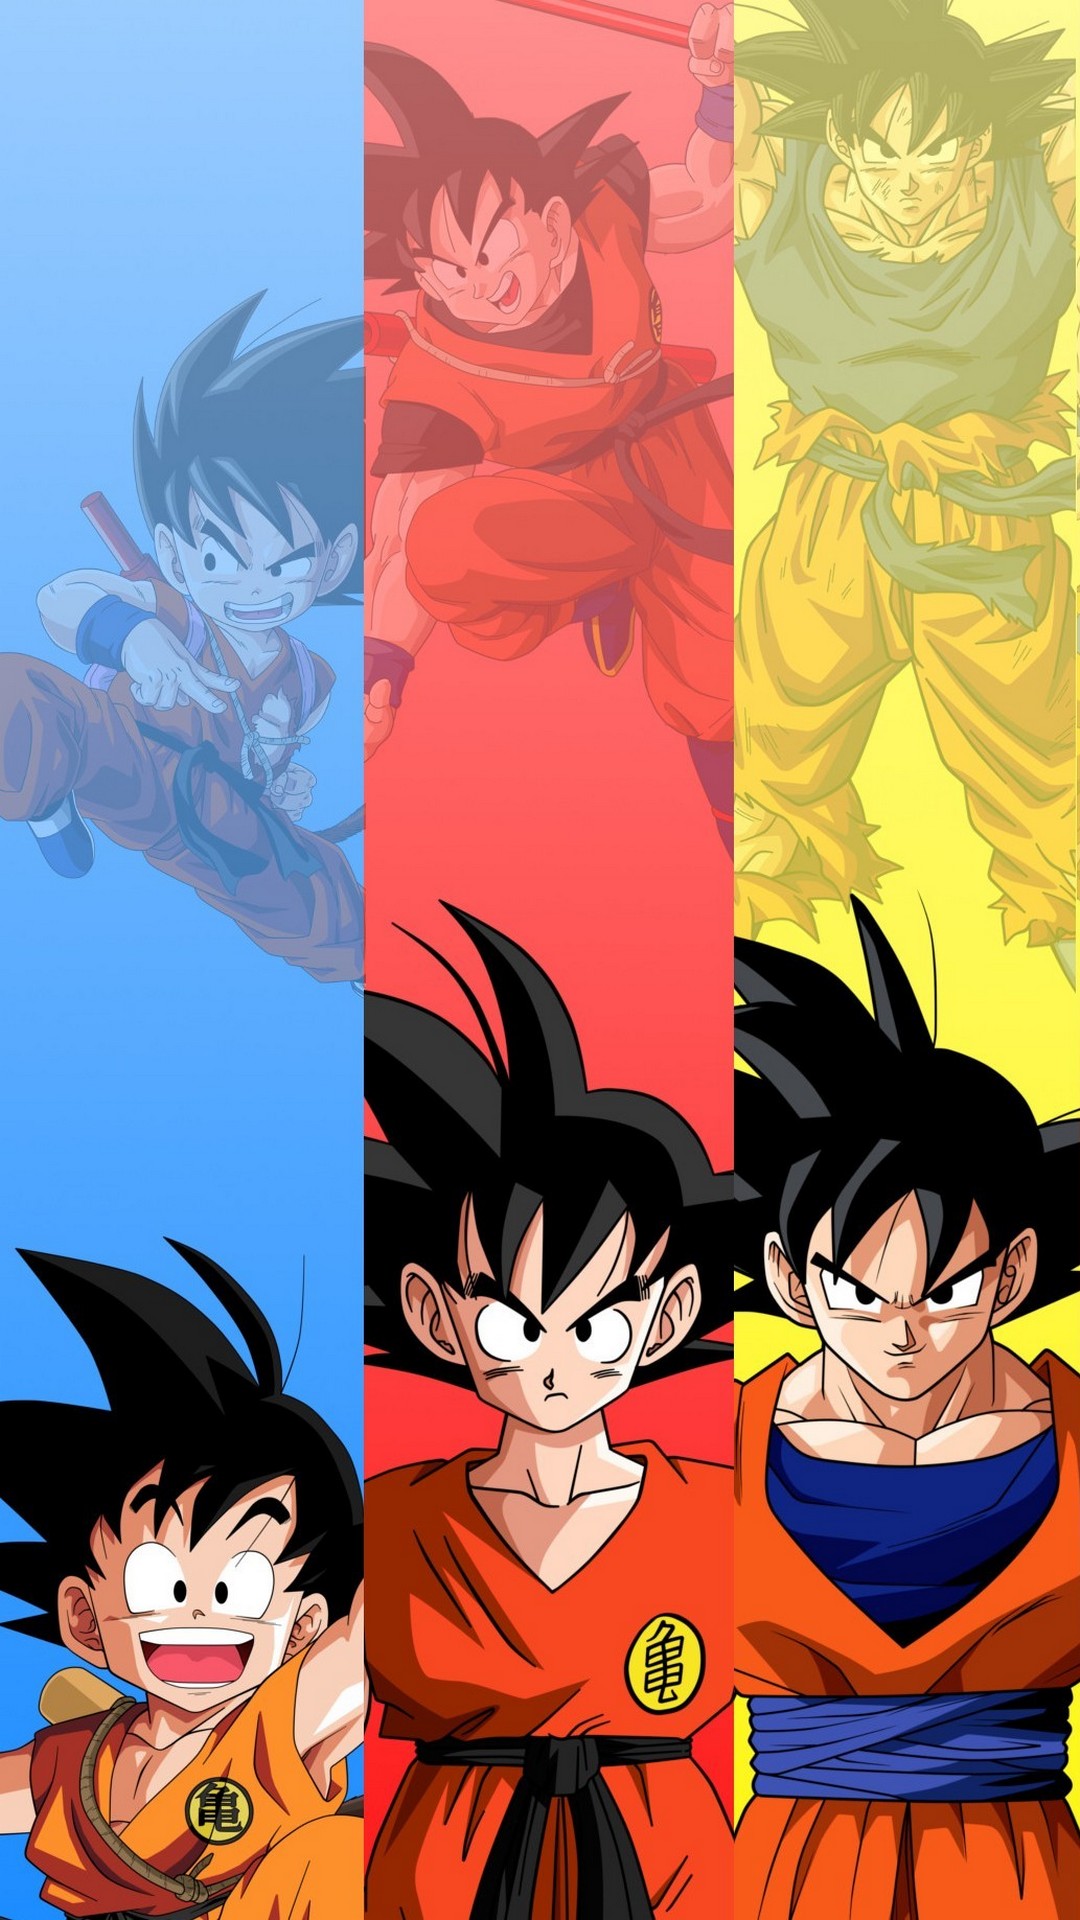 Goku Wallpaper For iPhone with image resolution 1080x1920 pixel. You can make this wallpaper for your iPhone 5, 6, 7, 8, X backgrounds, Mobile Screensaver, or iPad Lock Screen